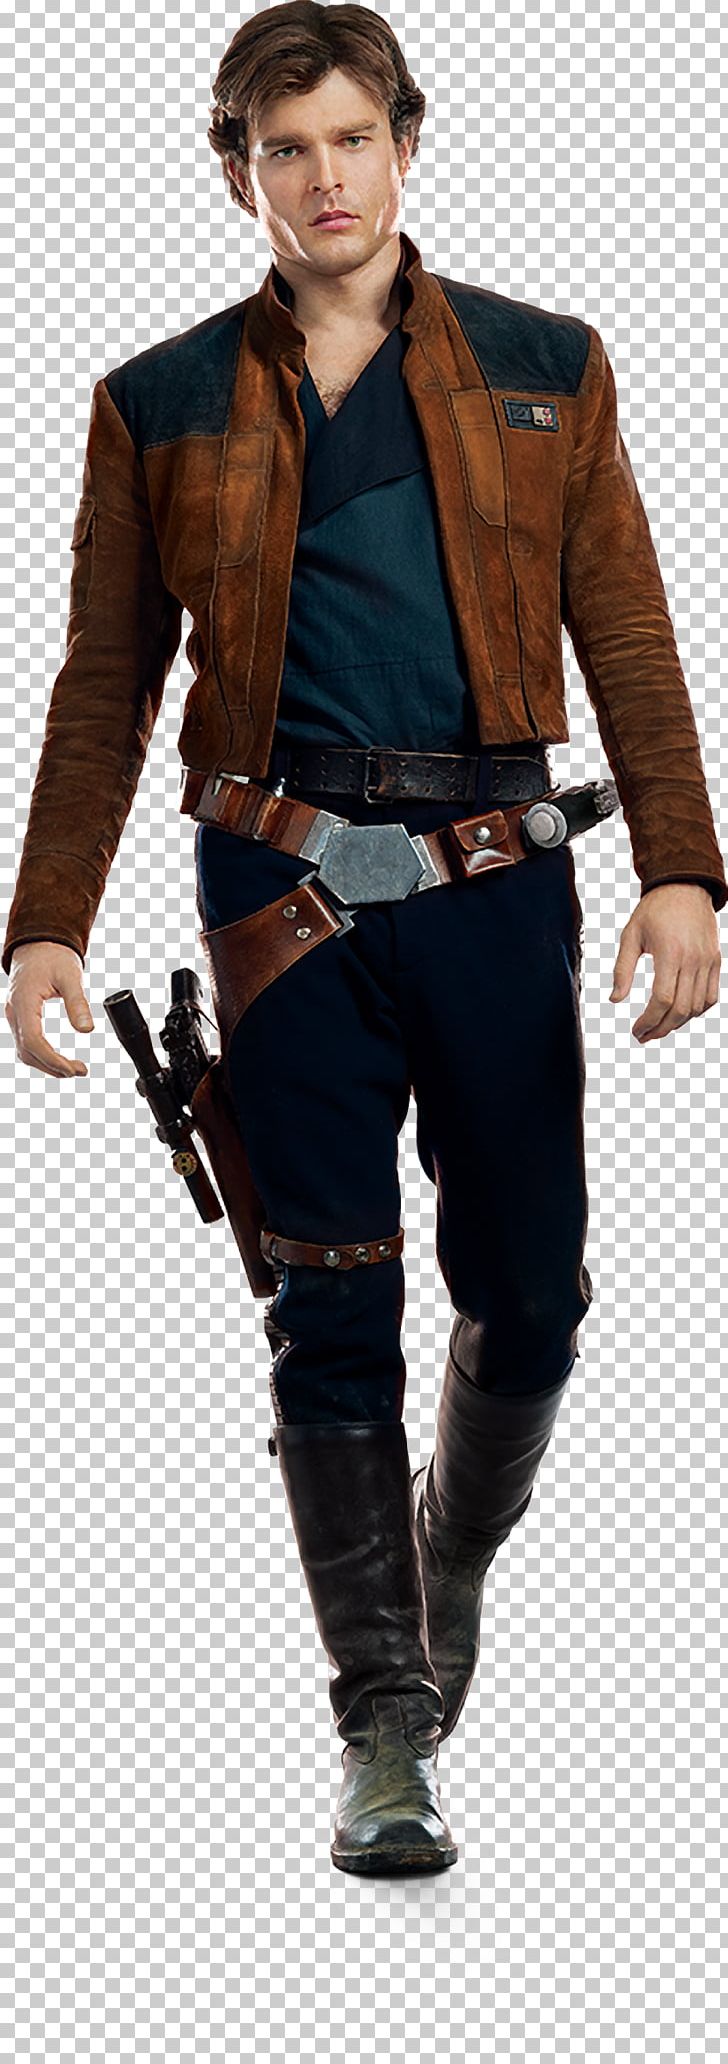 Alden Ehrenreich Solo: A Star Wars Story Han Solo Lando Calrissian Chewbacca PNG, Clipart, Actor, Alden Ehrenreich, Character, Chewbacca, Costume Free PNG Download